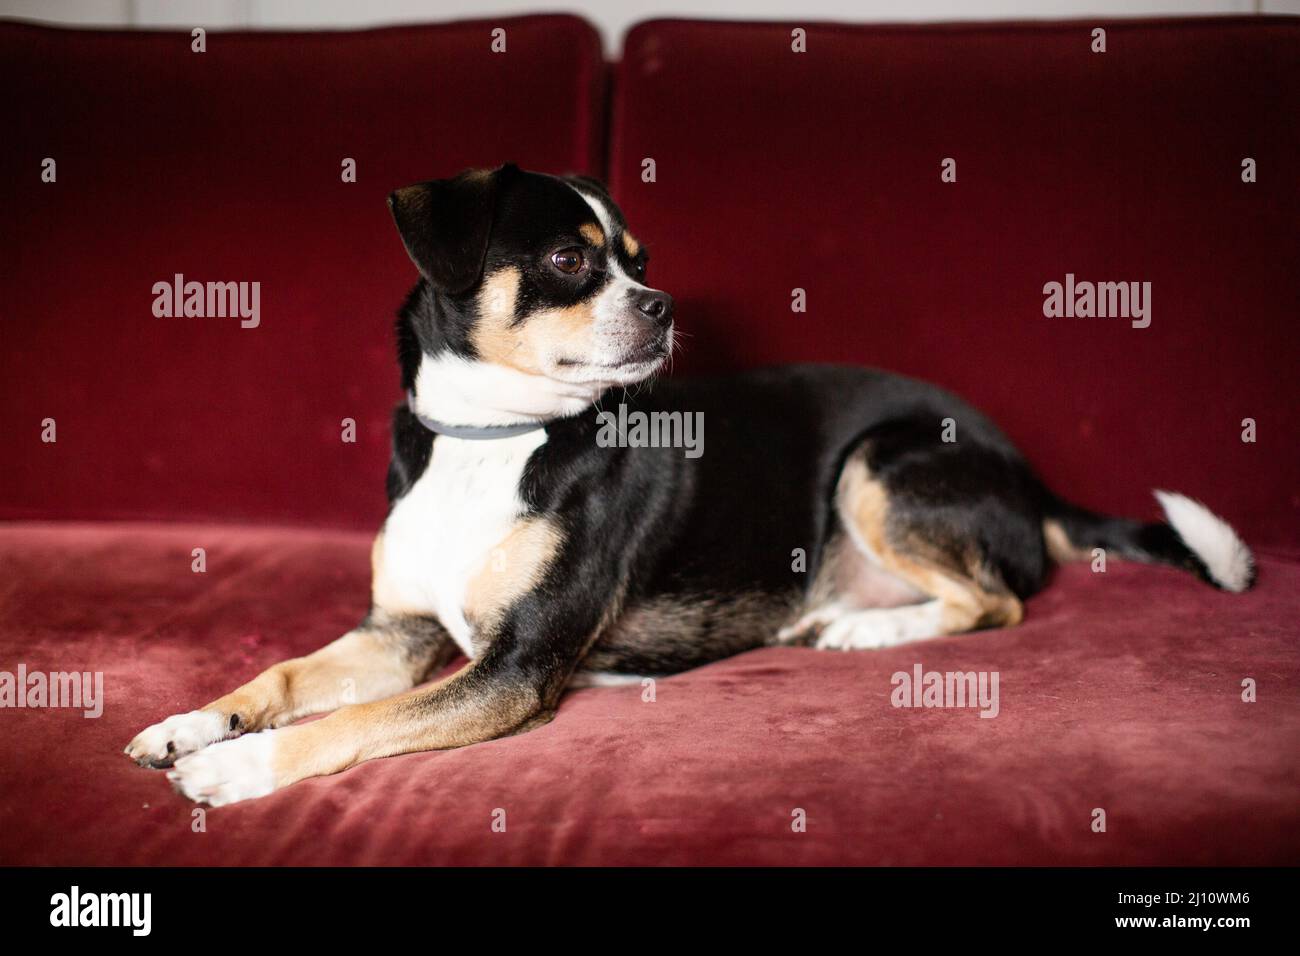 Horizontal Shot of a Black and White Dog on a Maroon Couch Stock Photo